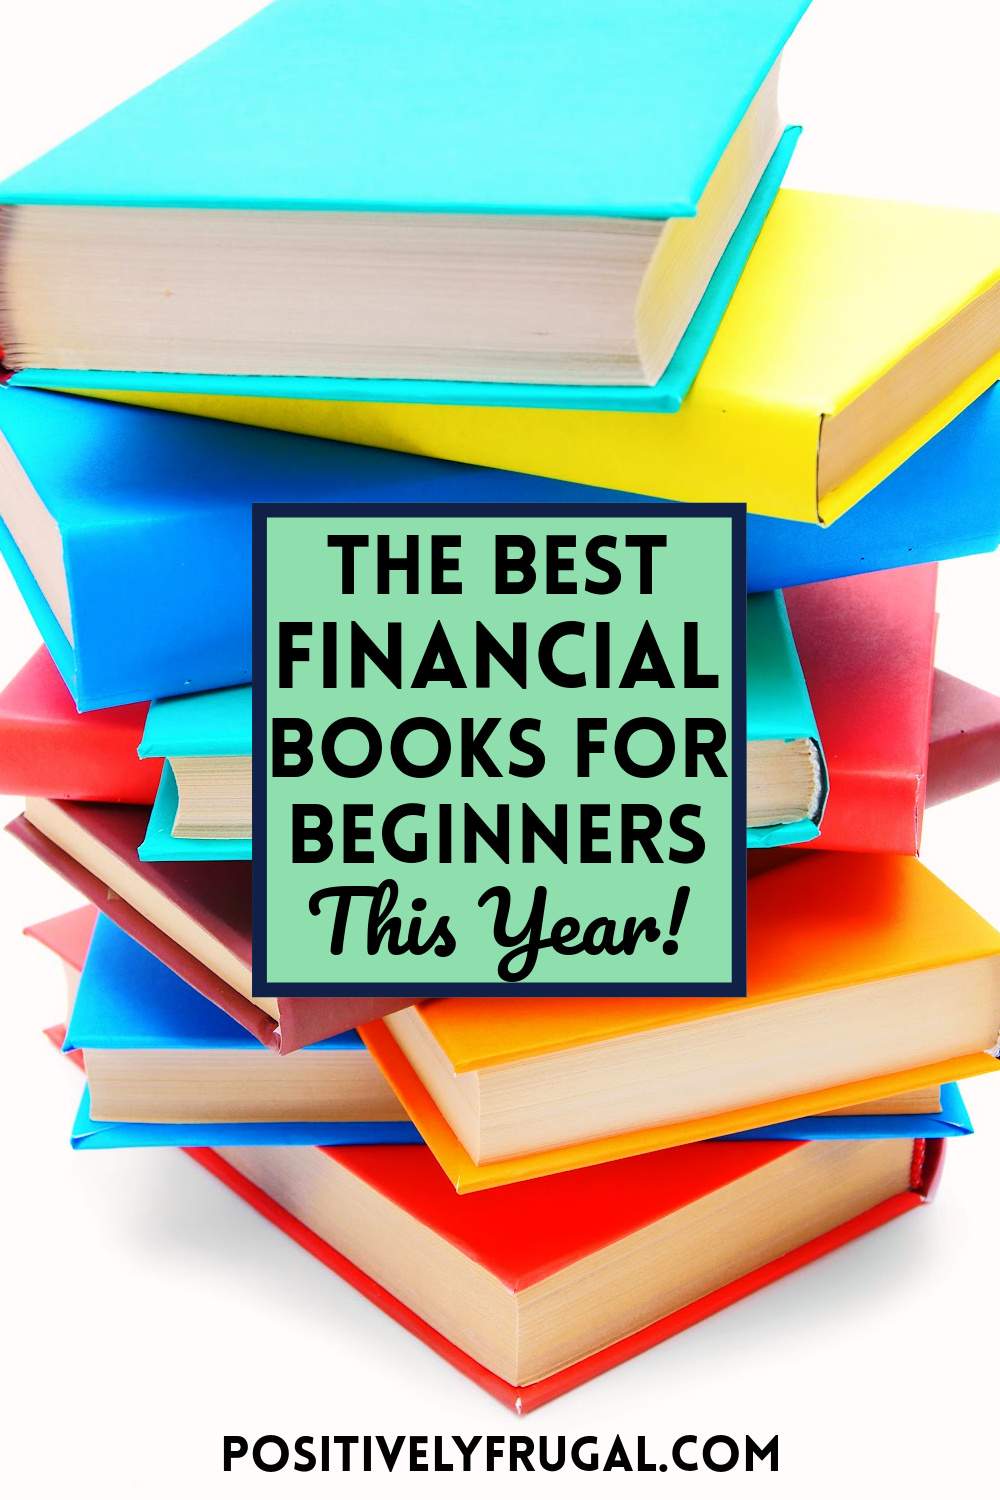 The Best Financial Books for Beginners This Year by PositivelyFrugal.com